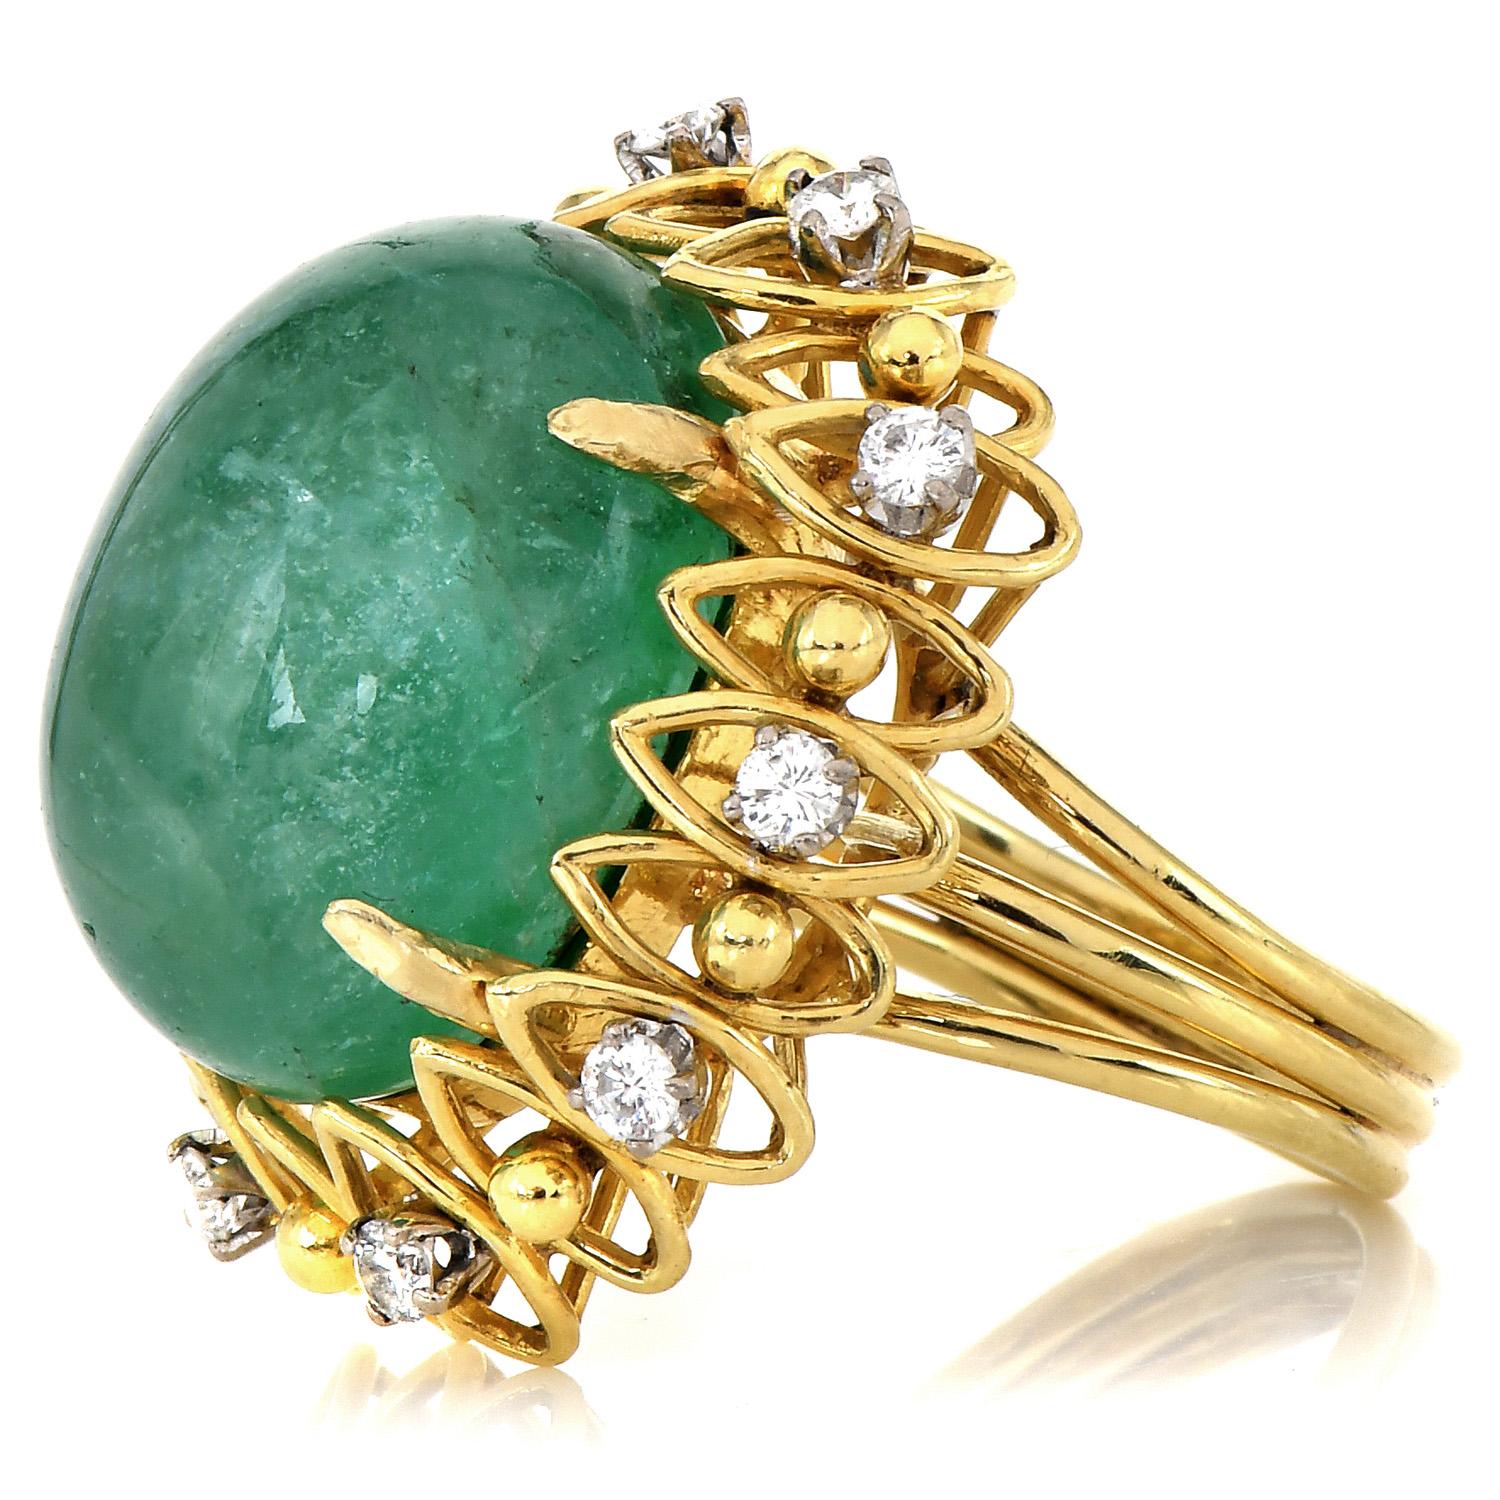 An Open Floral design vintage cocktail ring from the late 1970s.

Crafted in solid 18K yellow gold, the center is adorned by a GIA certified Green Beryl Cabochon Gemstone, Cabochon oval cut, prong set weighing approximately 32.39 carats.

Surrounded